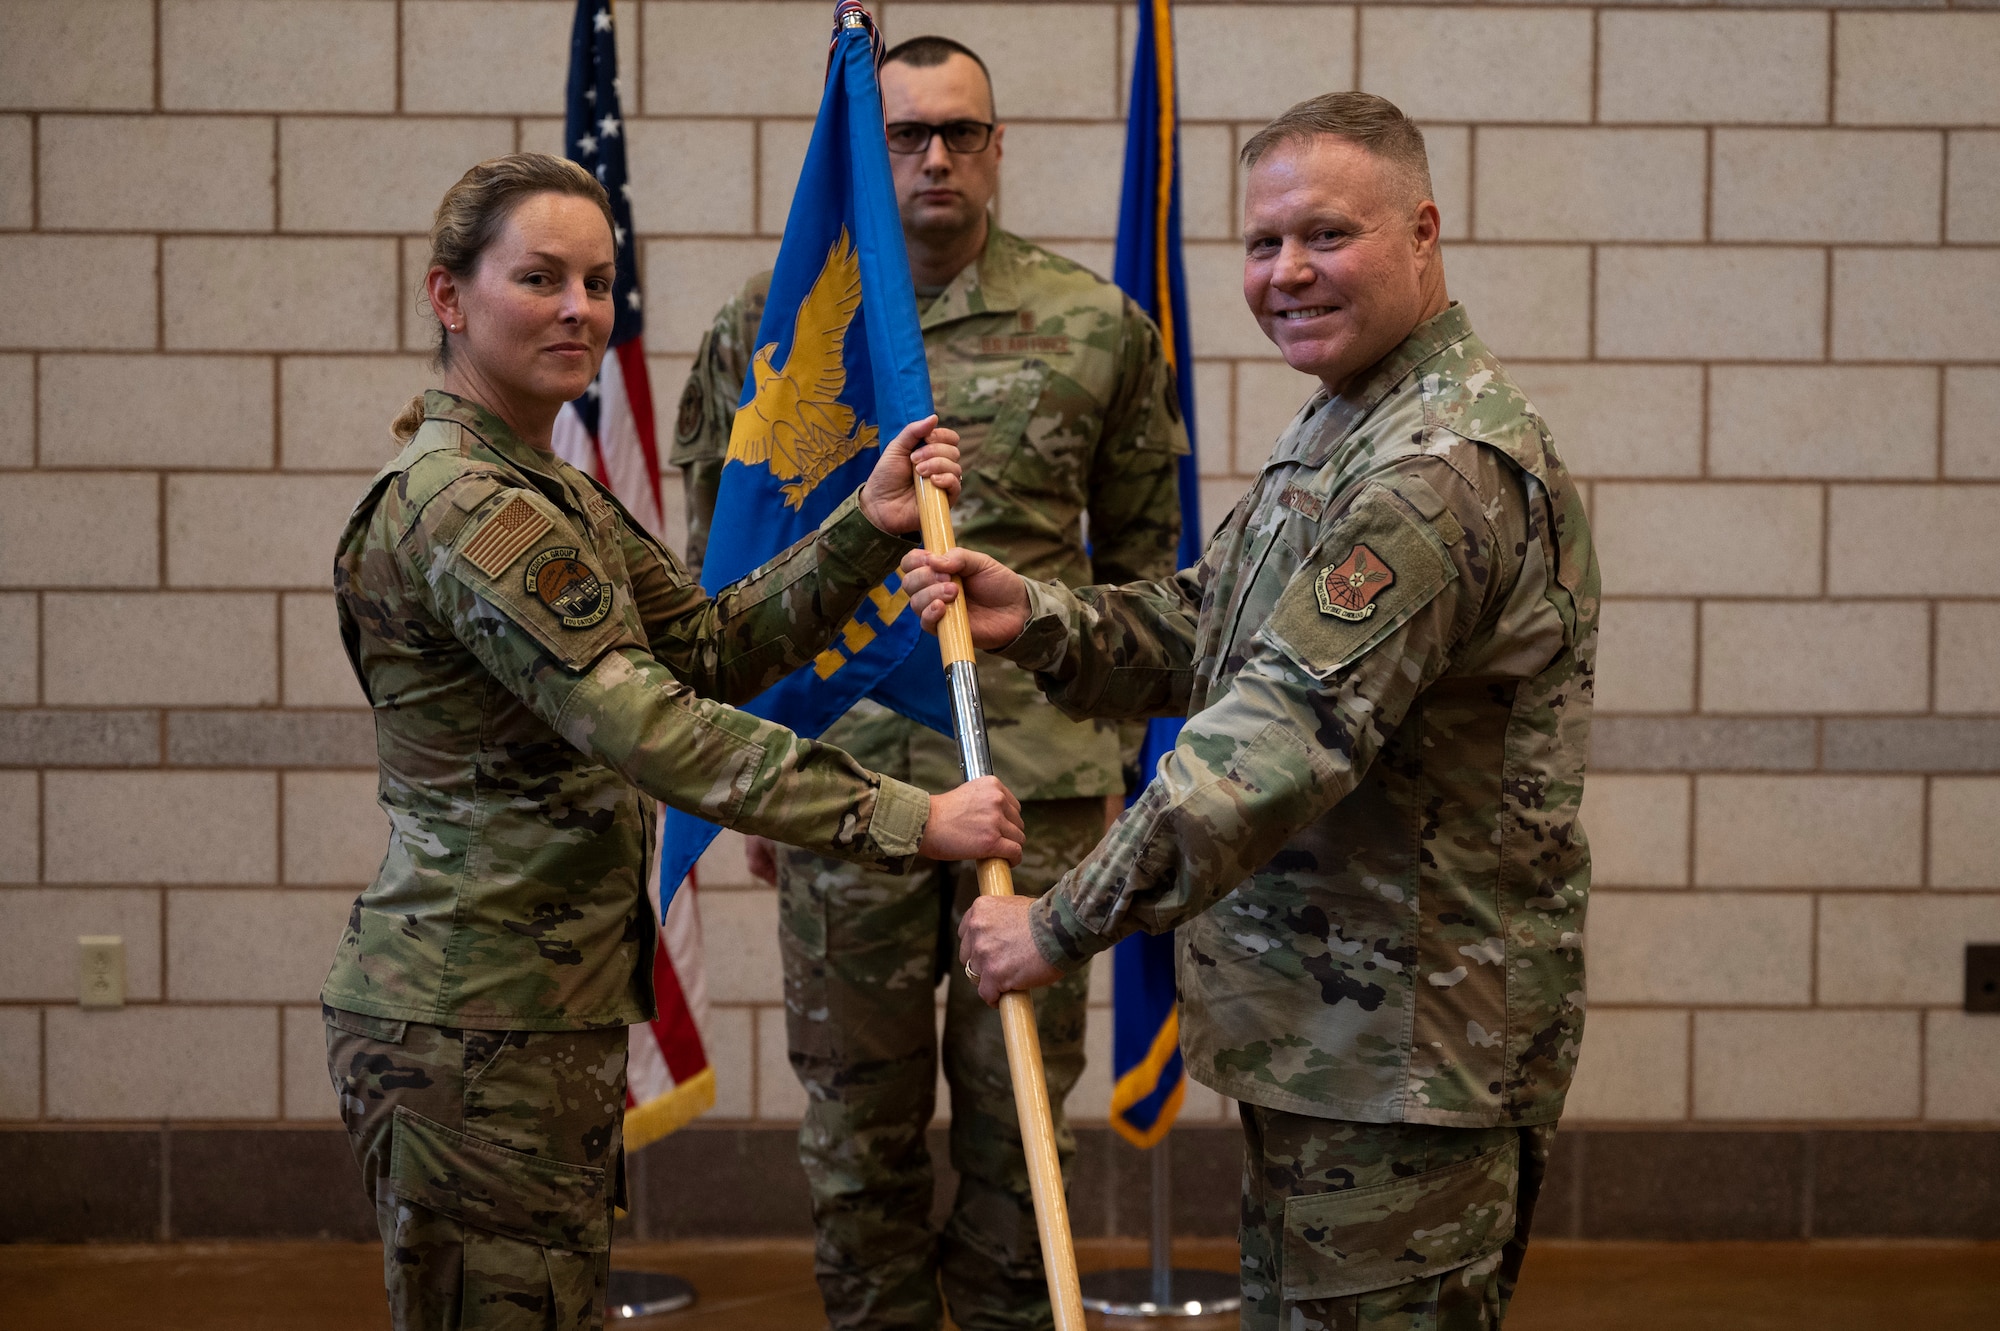 Col. Elizabeth Somsel, 7th Medical Group commander, takes the guidon from Lt. Col. Michael Renkas, outgoing 7th Medical Support Squadron commander, during the 7th MDSS Inactivation Ceremony at Dyess Air Force Base, Texas, June 24, 2022. Renkas took command of the 7th MDSS amid the COVID-19 pandemic in July of 2020. (U.S. Air Force photo by Senior Airman Reilly McGuire)